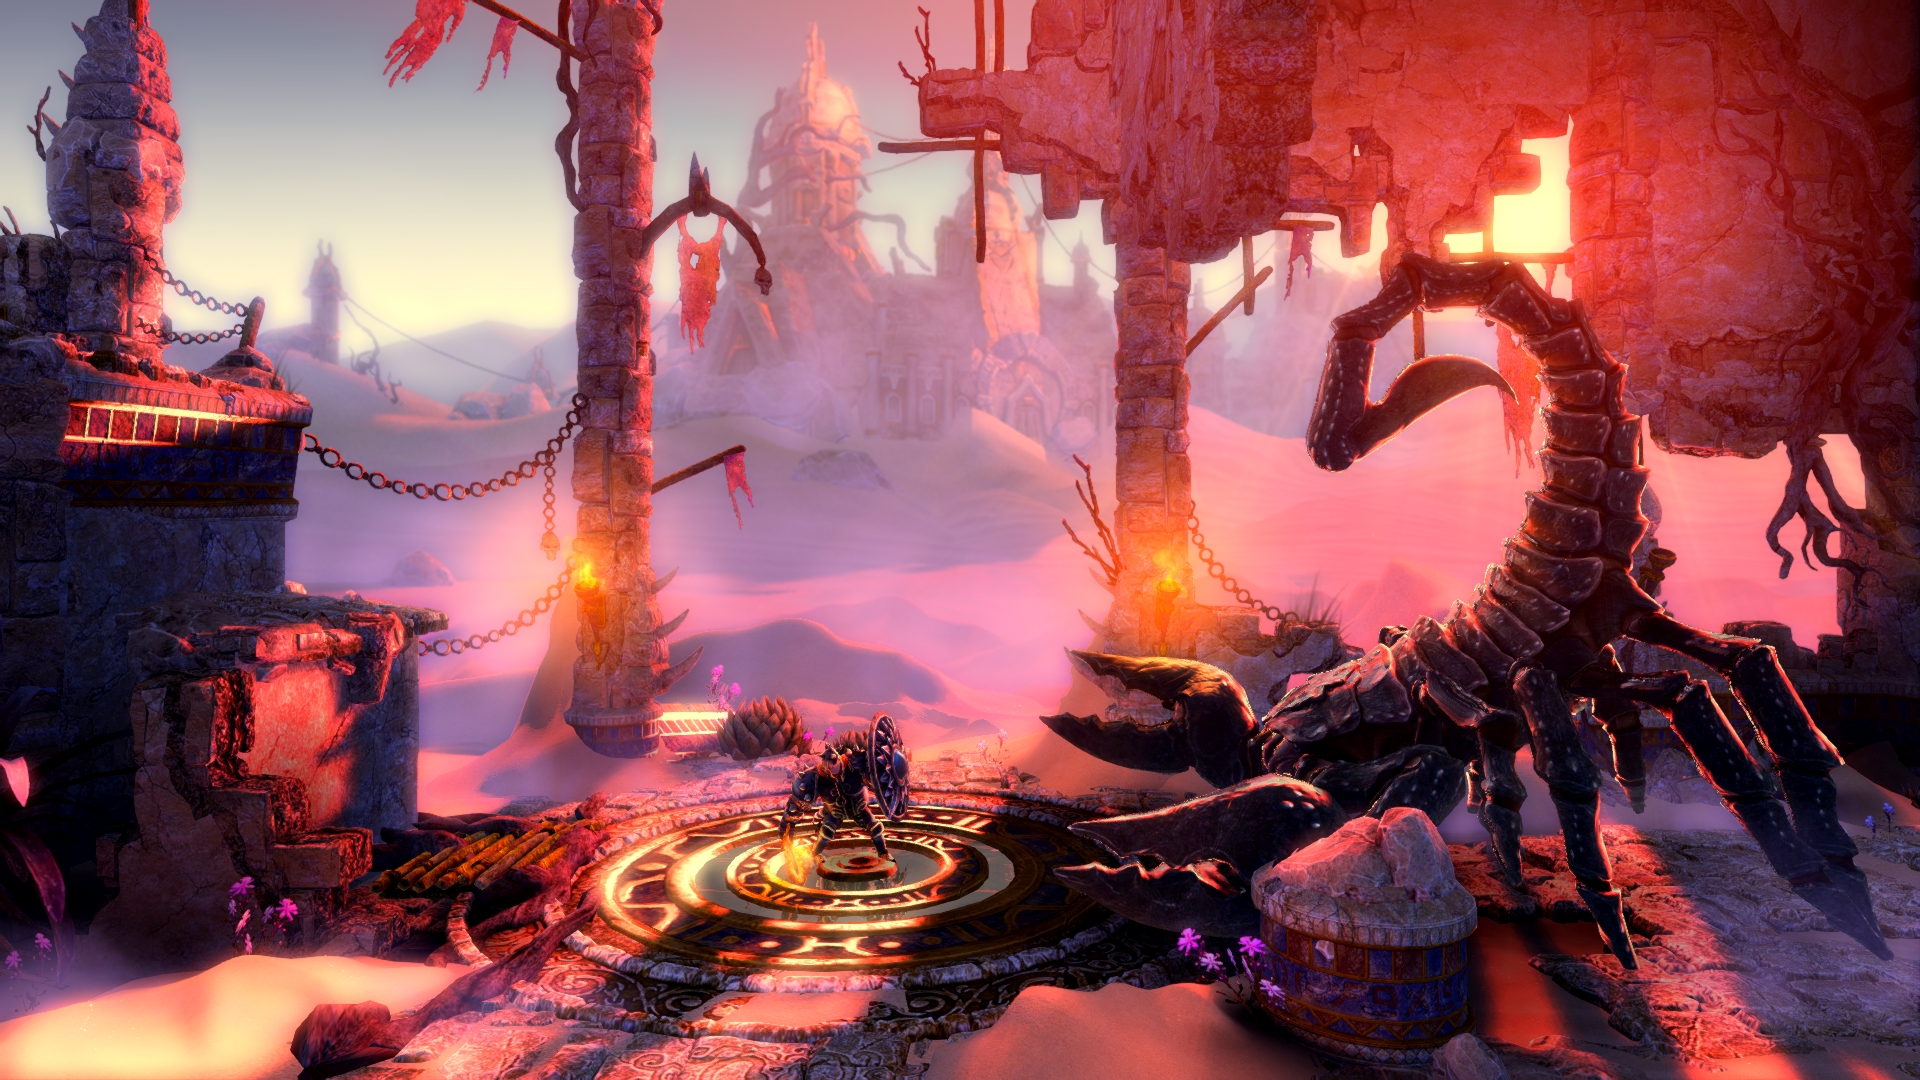 trine 2 ps4 download free